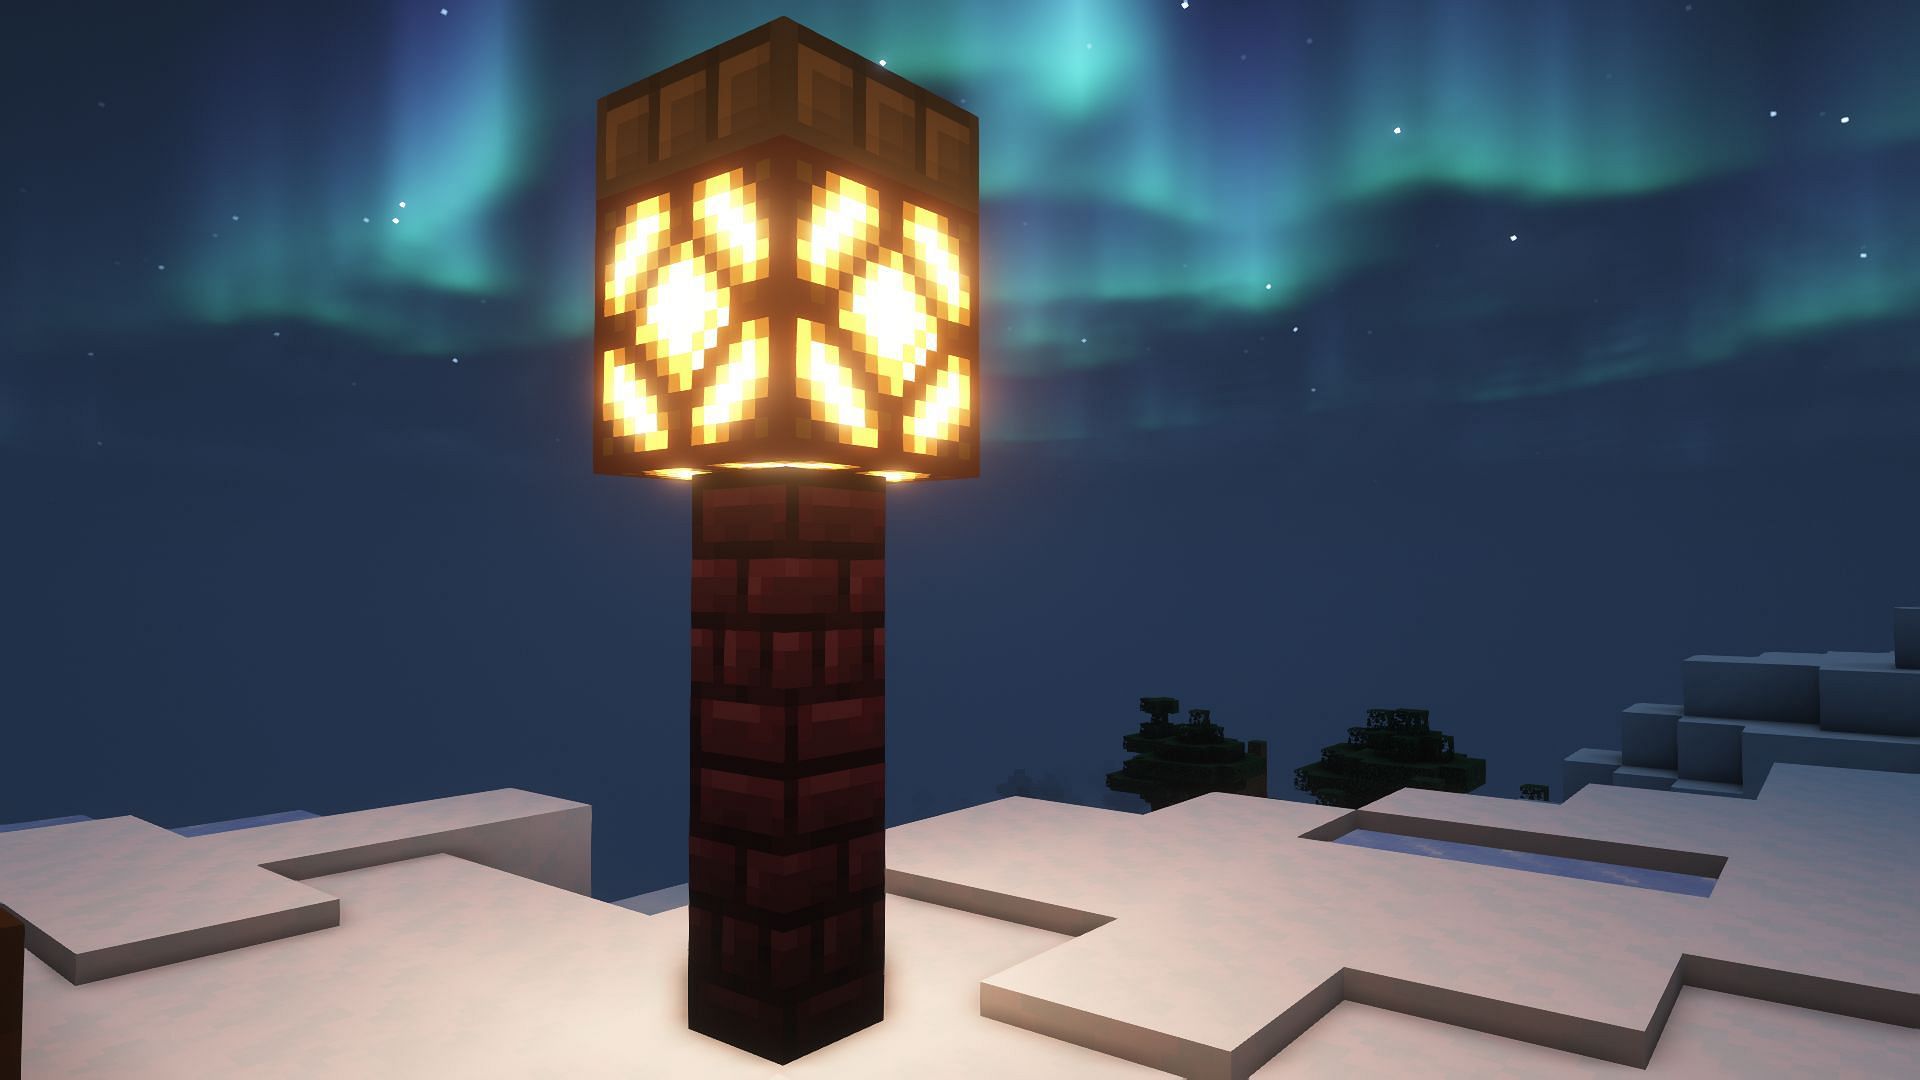 Redstone lamp will automatically turn on and off depending on the time of day in Minecraft (Image via Mojang)